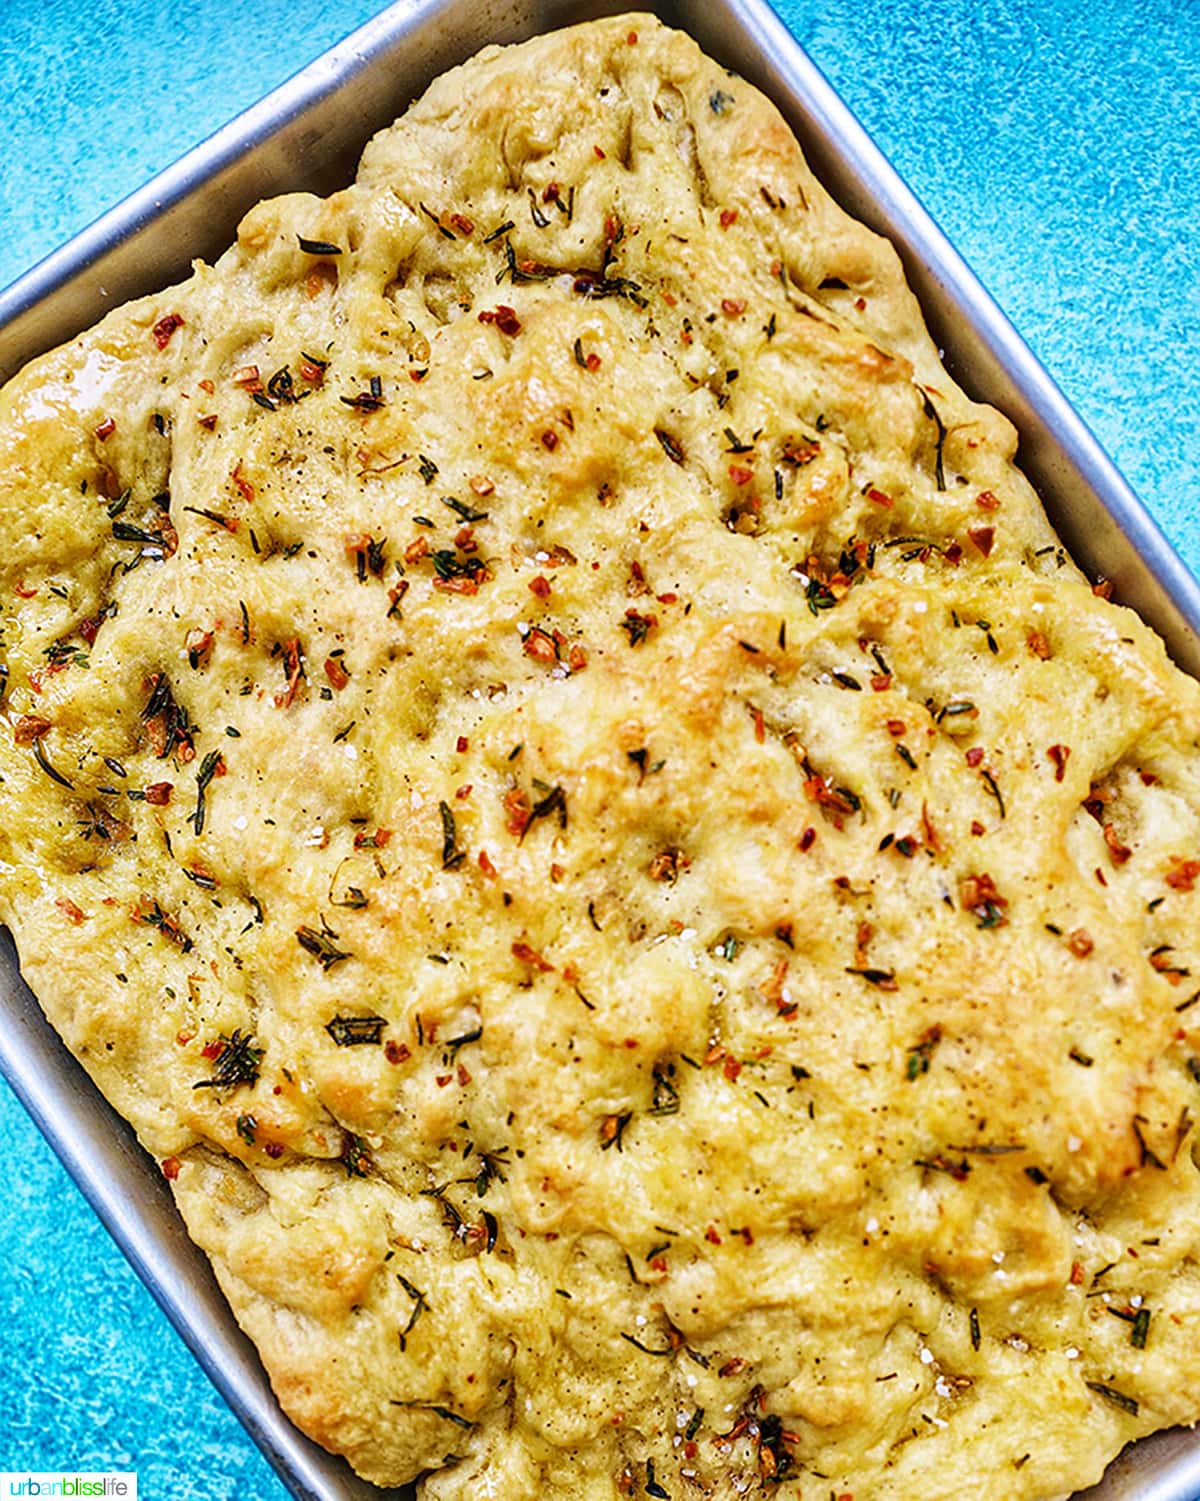 garlic rosemary focaccia bread in a baking sheet on bright blue background.